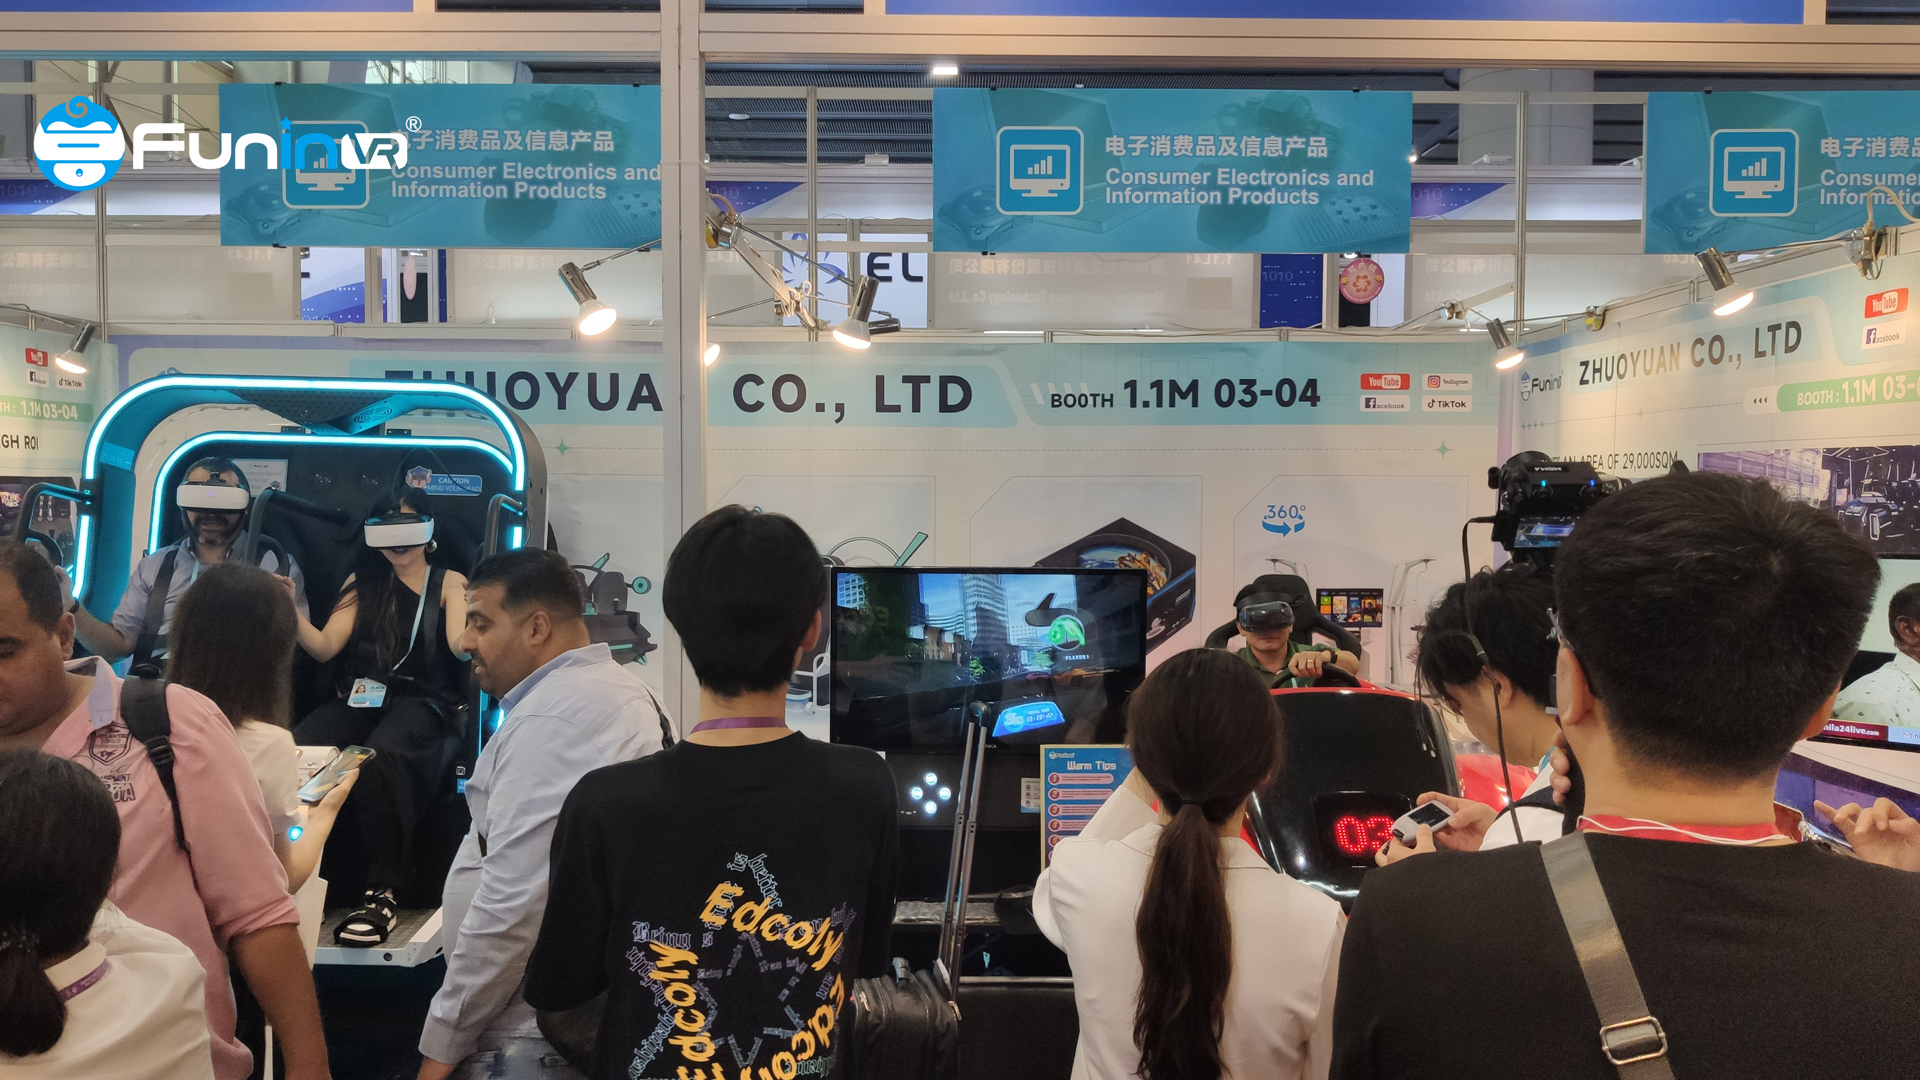 FuninVR Showcases Latest Innovations at the 135th Canton Fair - Company News - 1